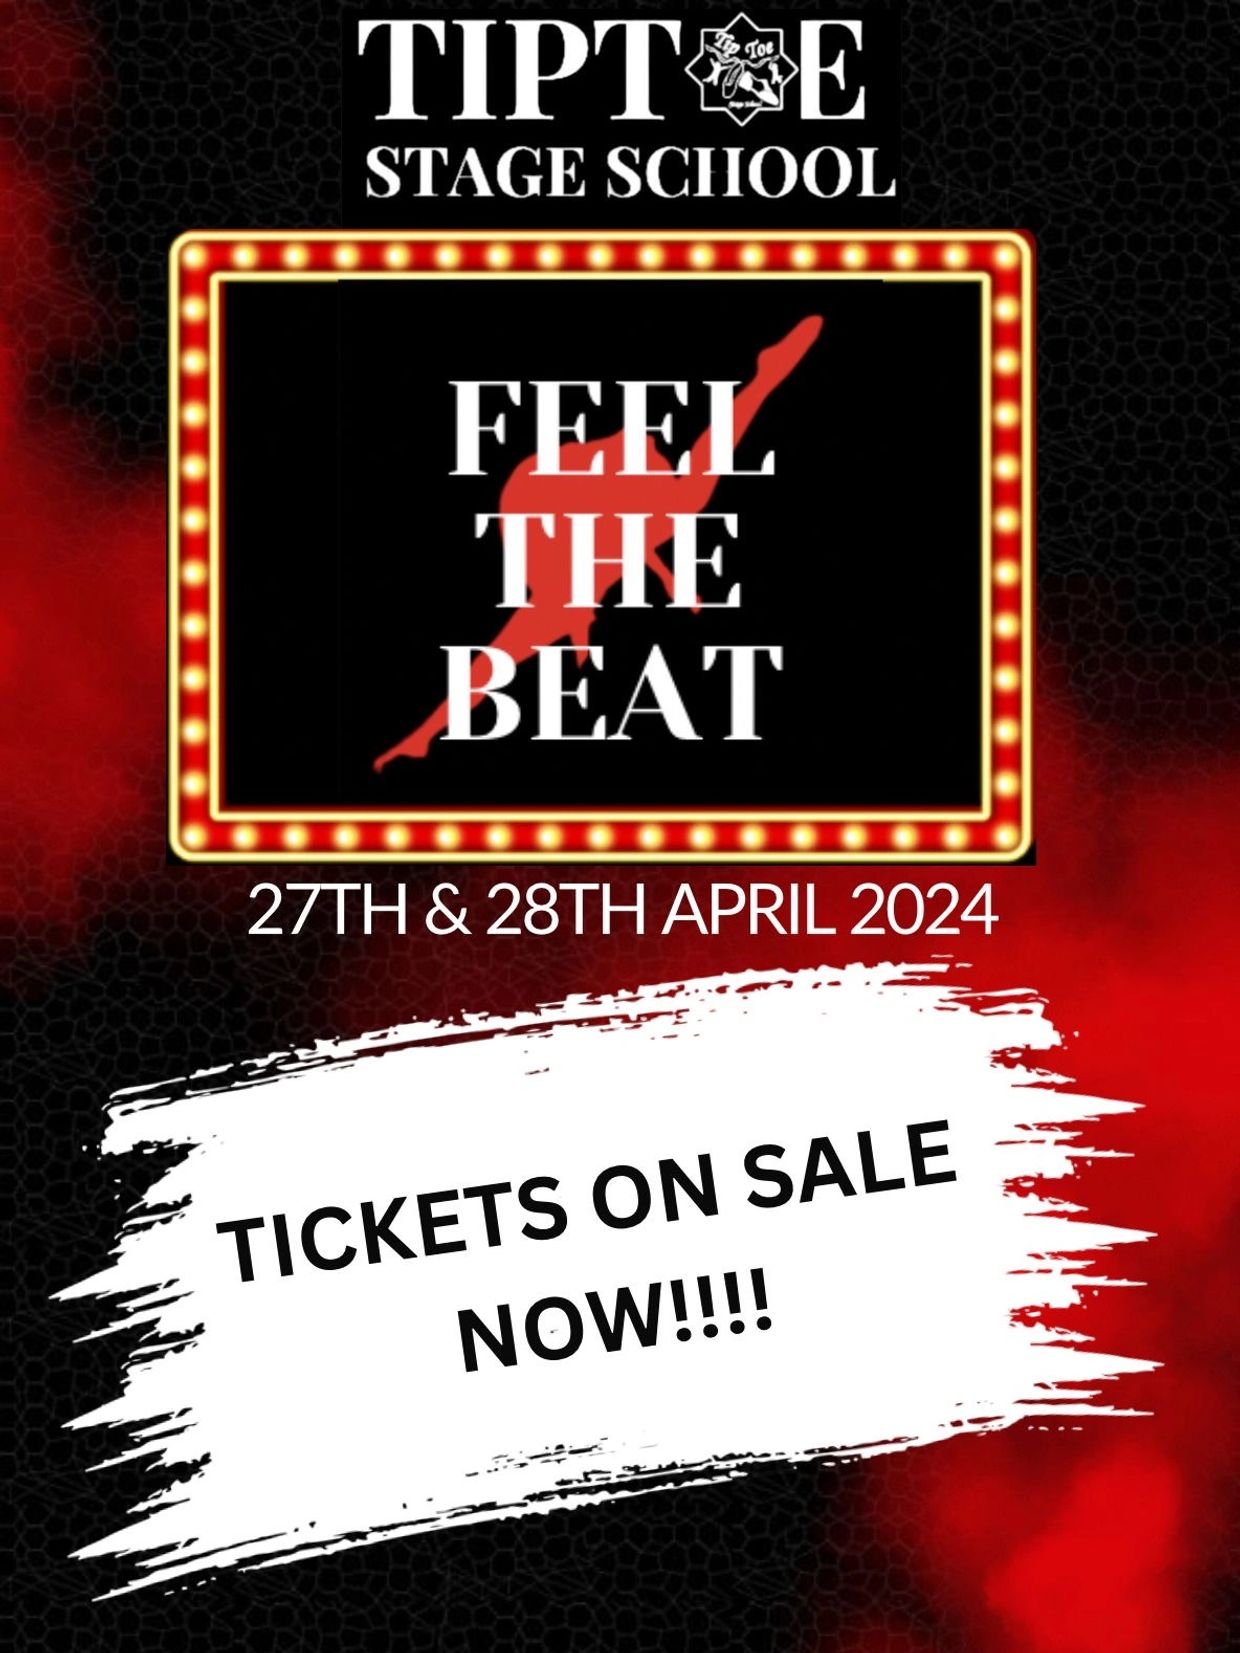 Click The photo to book your tickets.